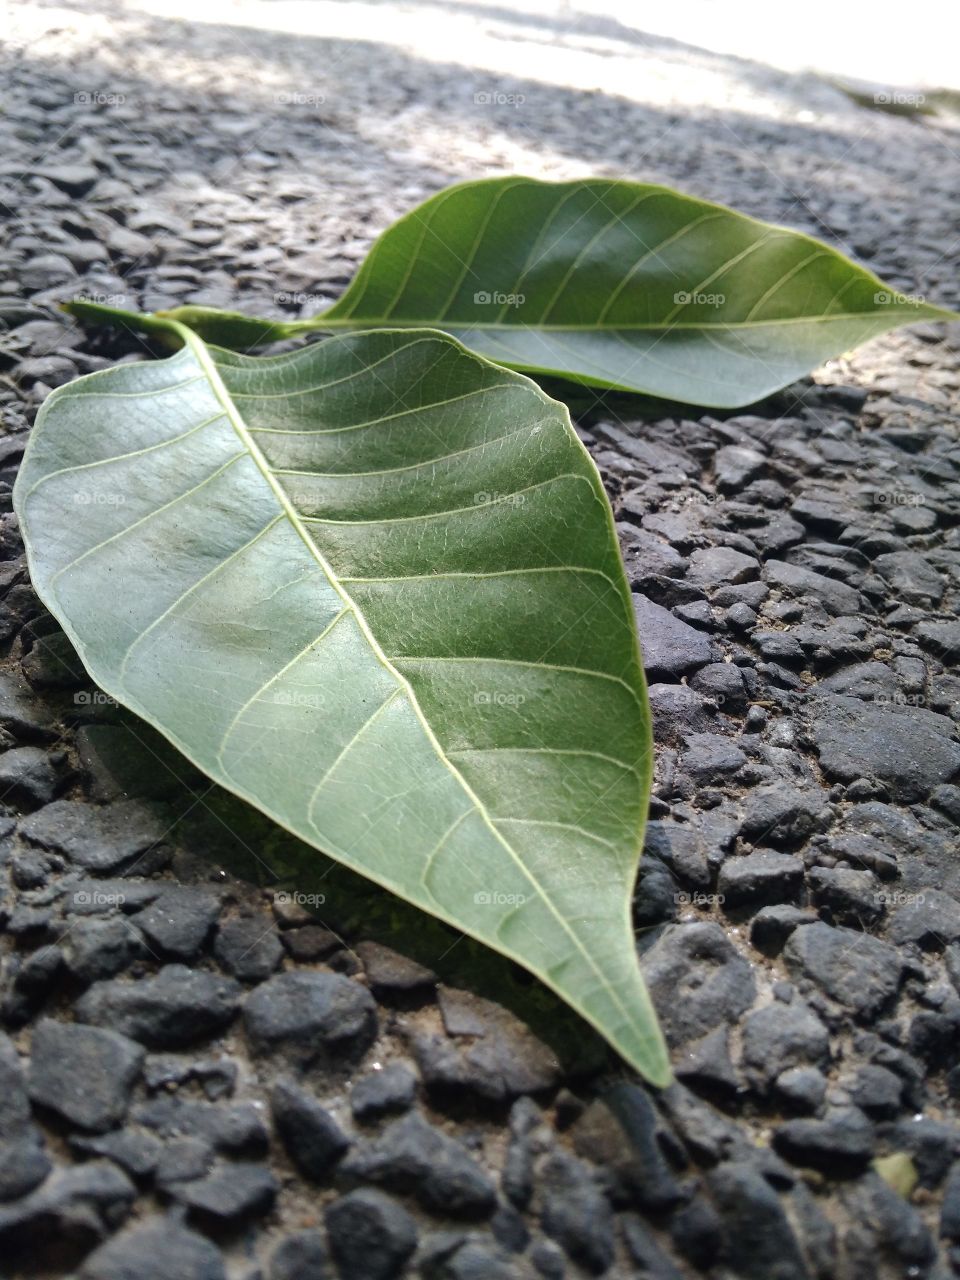 leaf is never WASTE in a life.
so cool a drop a leaf.....but eat a good in animal.